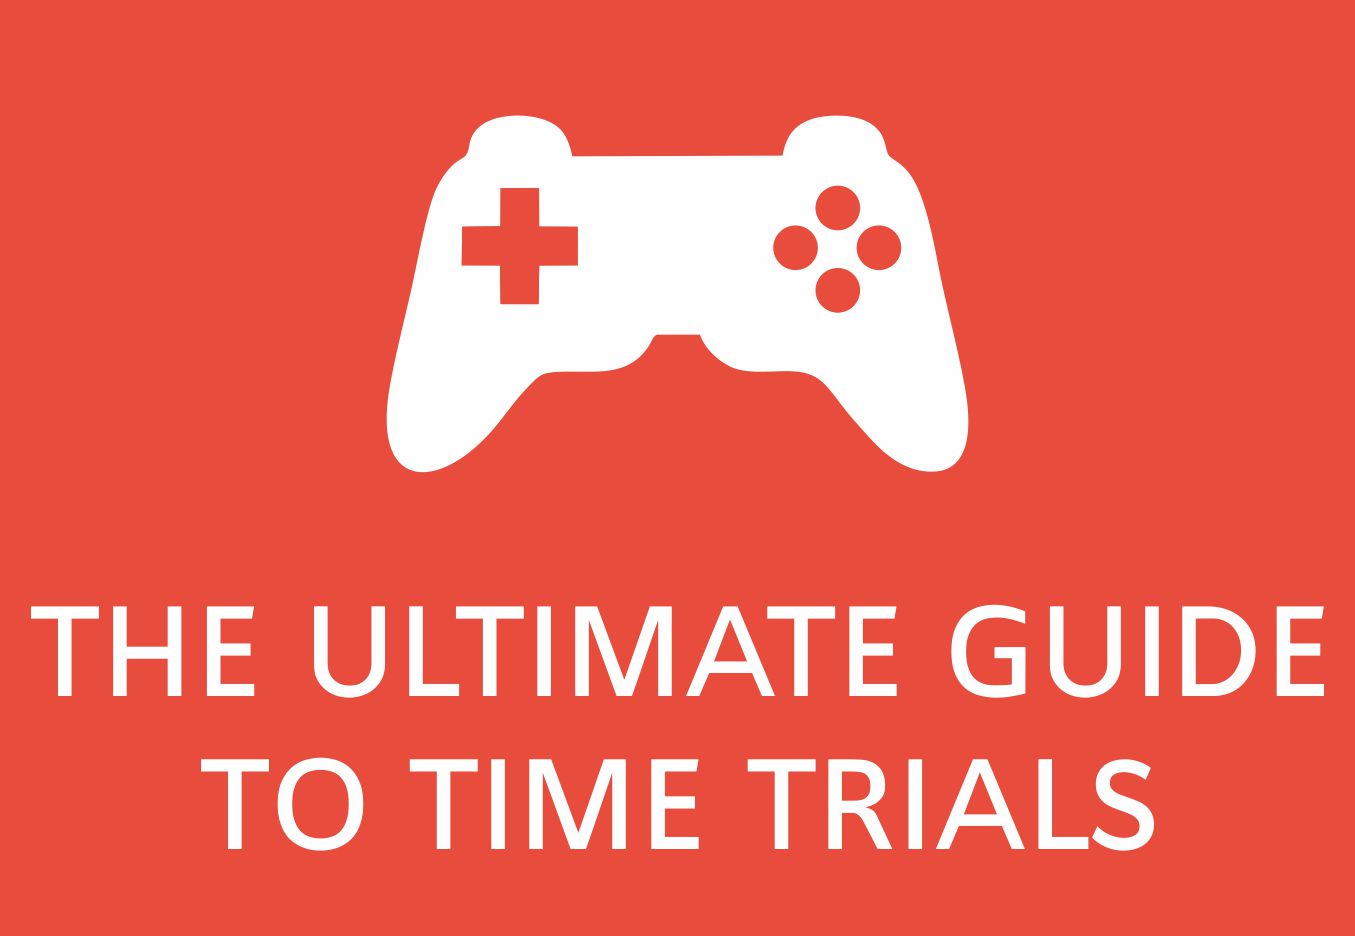 The Ultimate guide to time trials